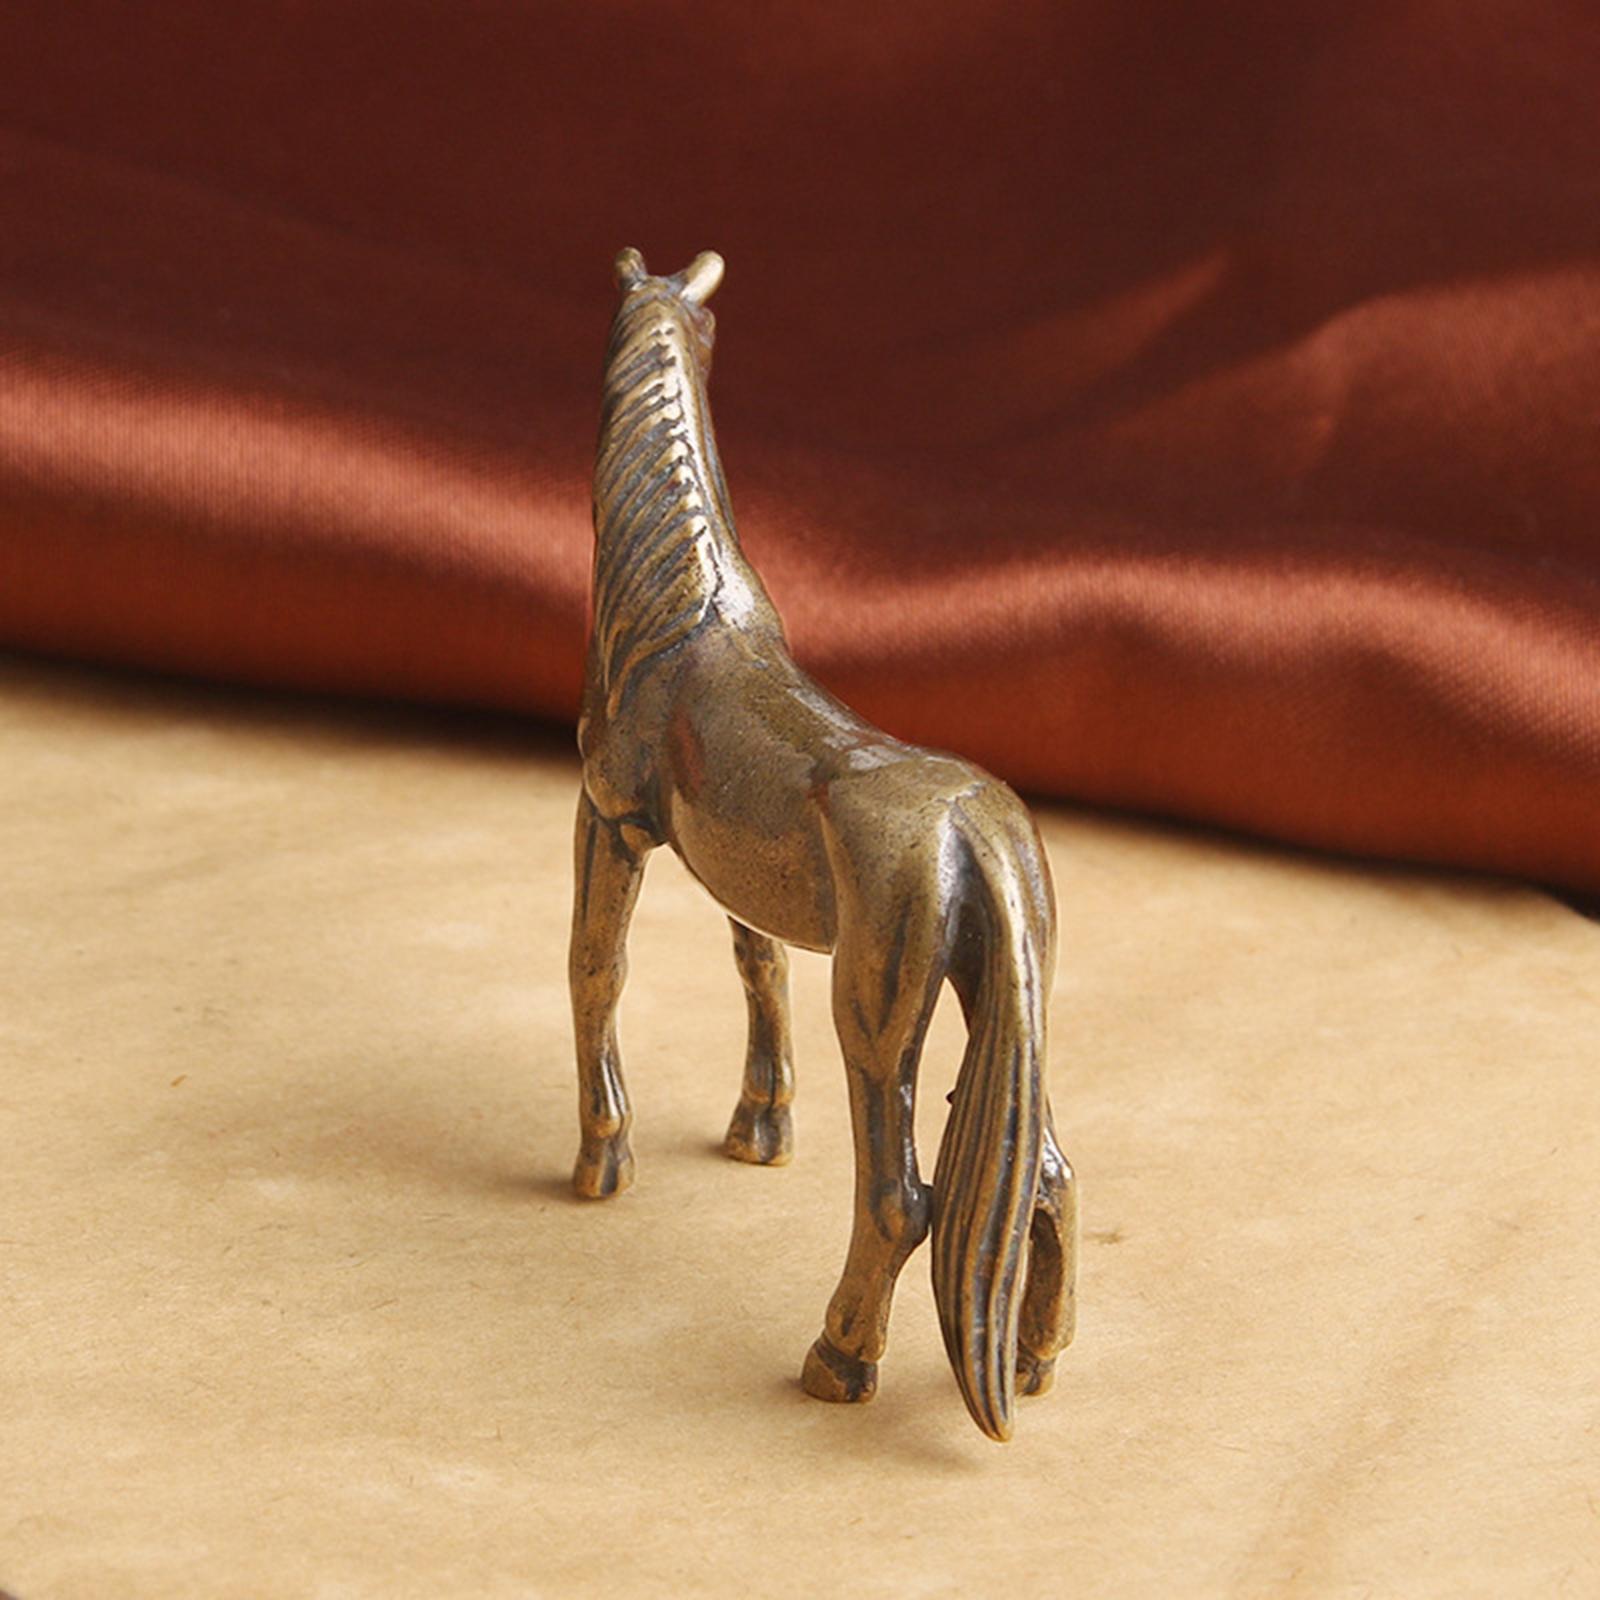 Hand Painted Horse Sculpture Figurines Crafts for Home Ornaments